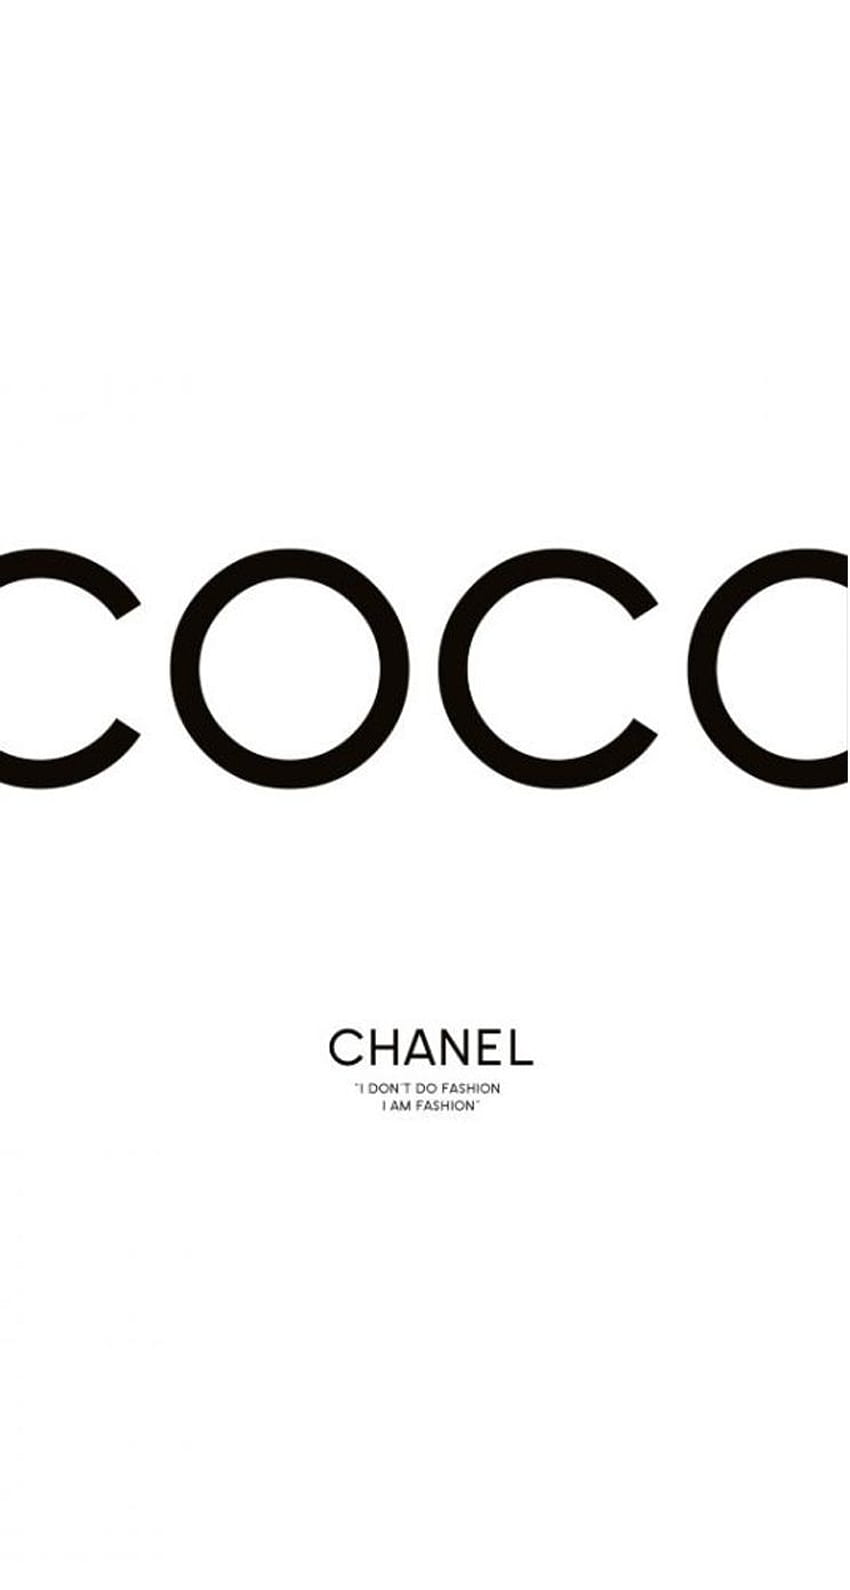 Coco Chanel IPhone Wallpaper (69+ images)